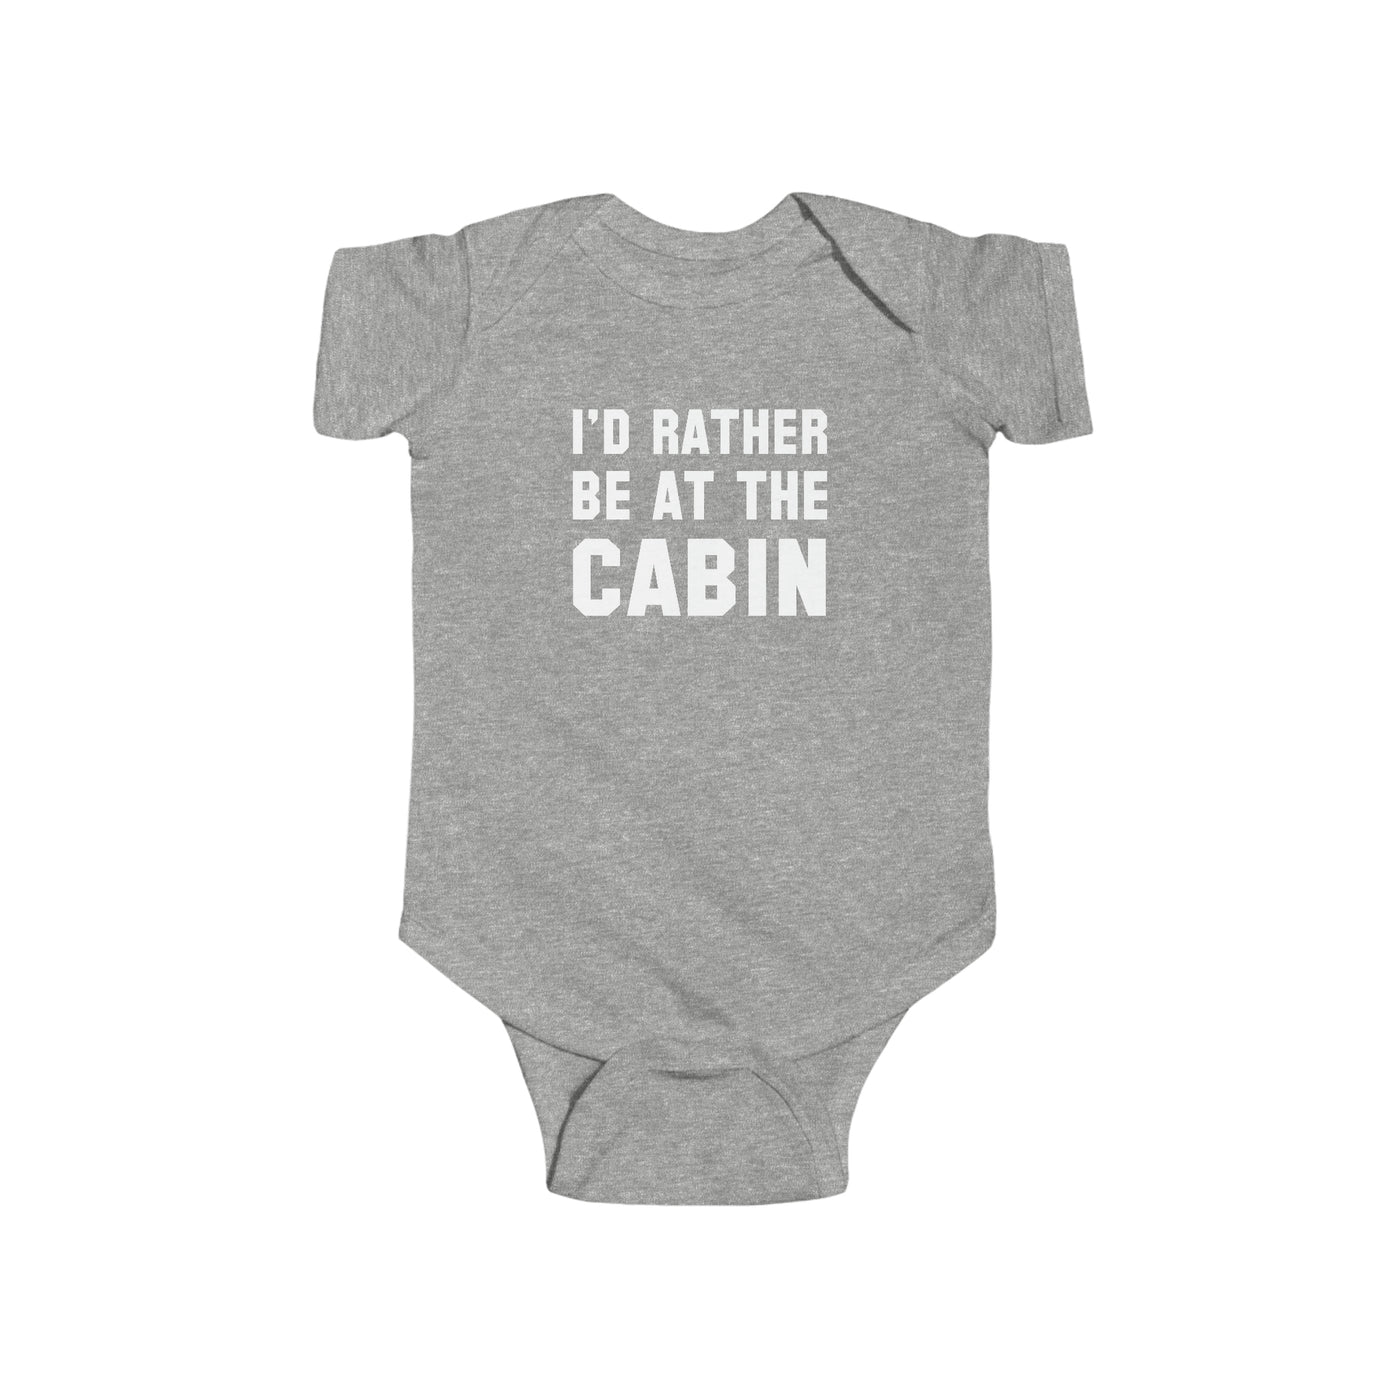 I'd Rather Be At The Cabin Baby Bodysuit